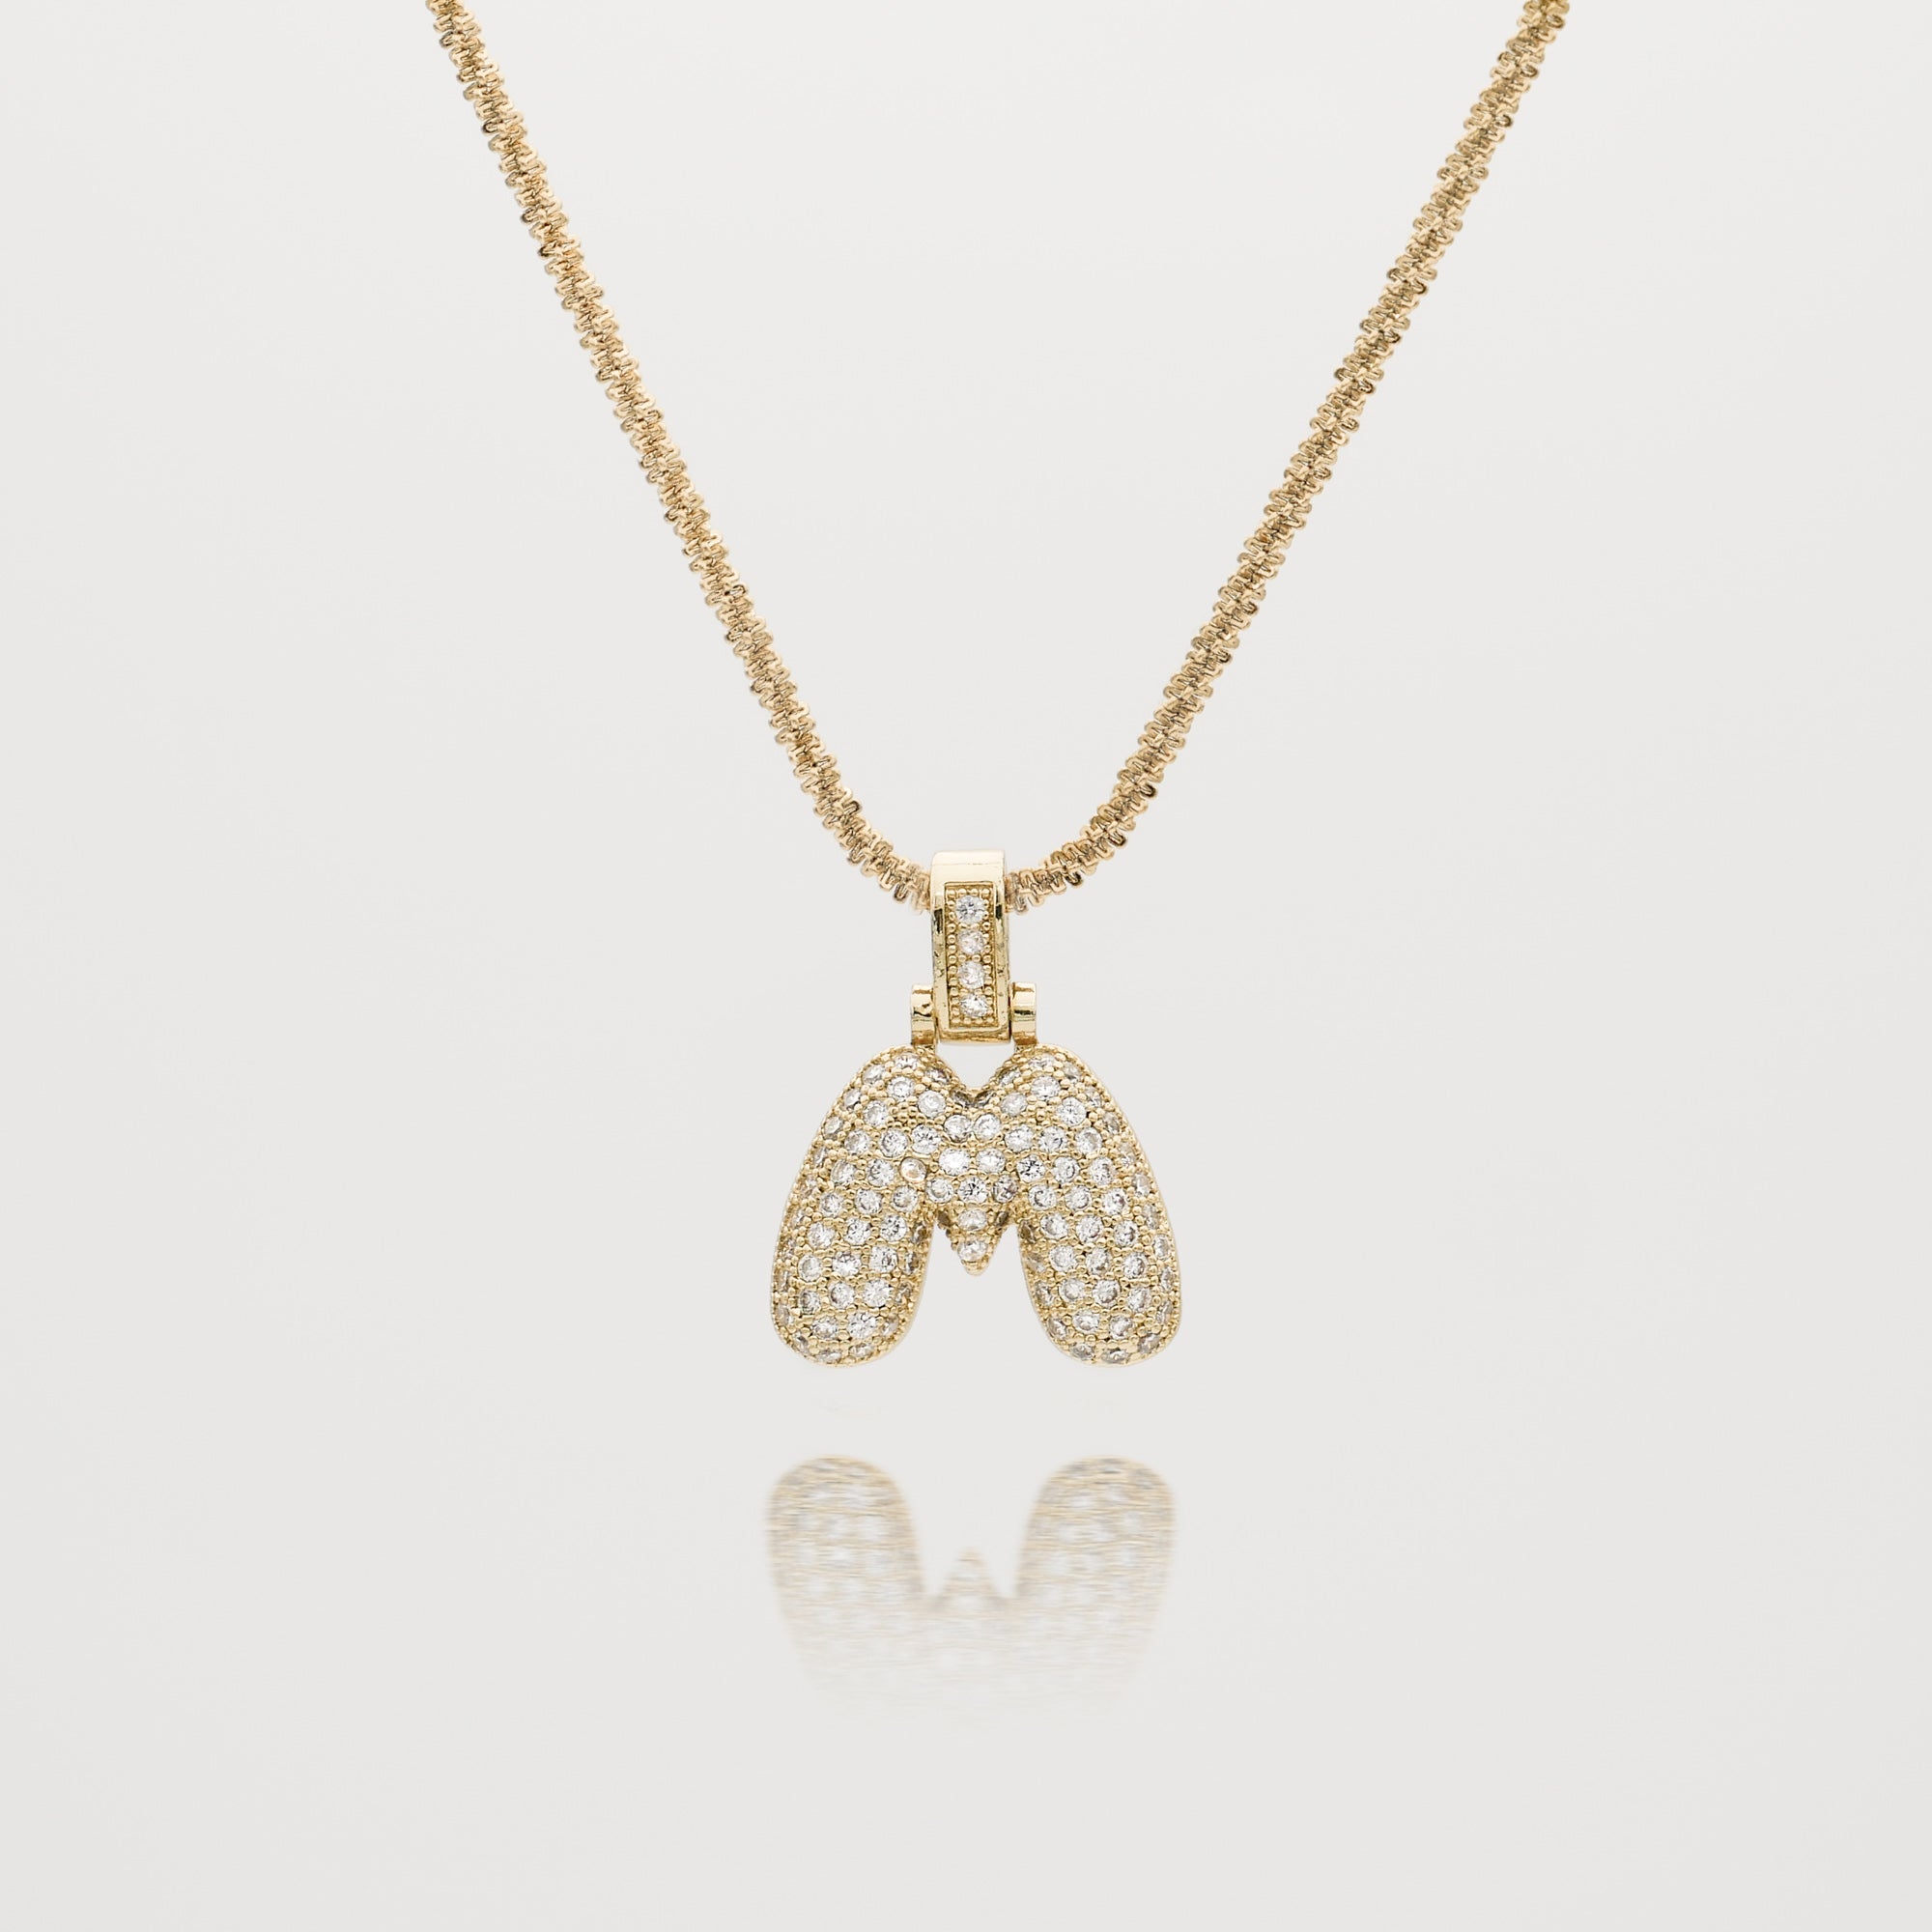 Pave Bubble Letter Initial Necklace encrusted with radiant CZ stones in gold tennis chain